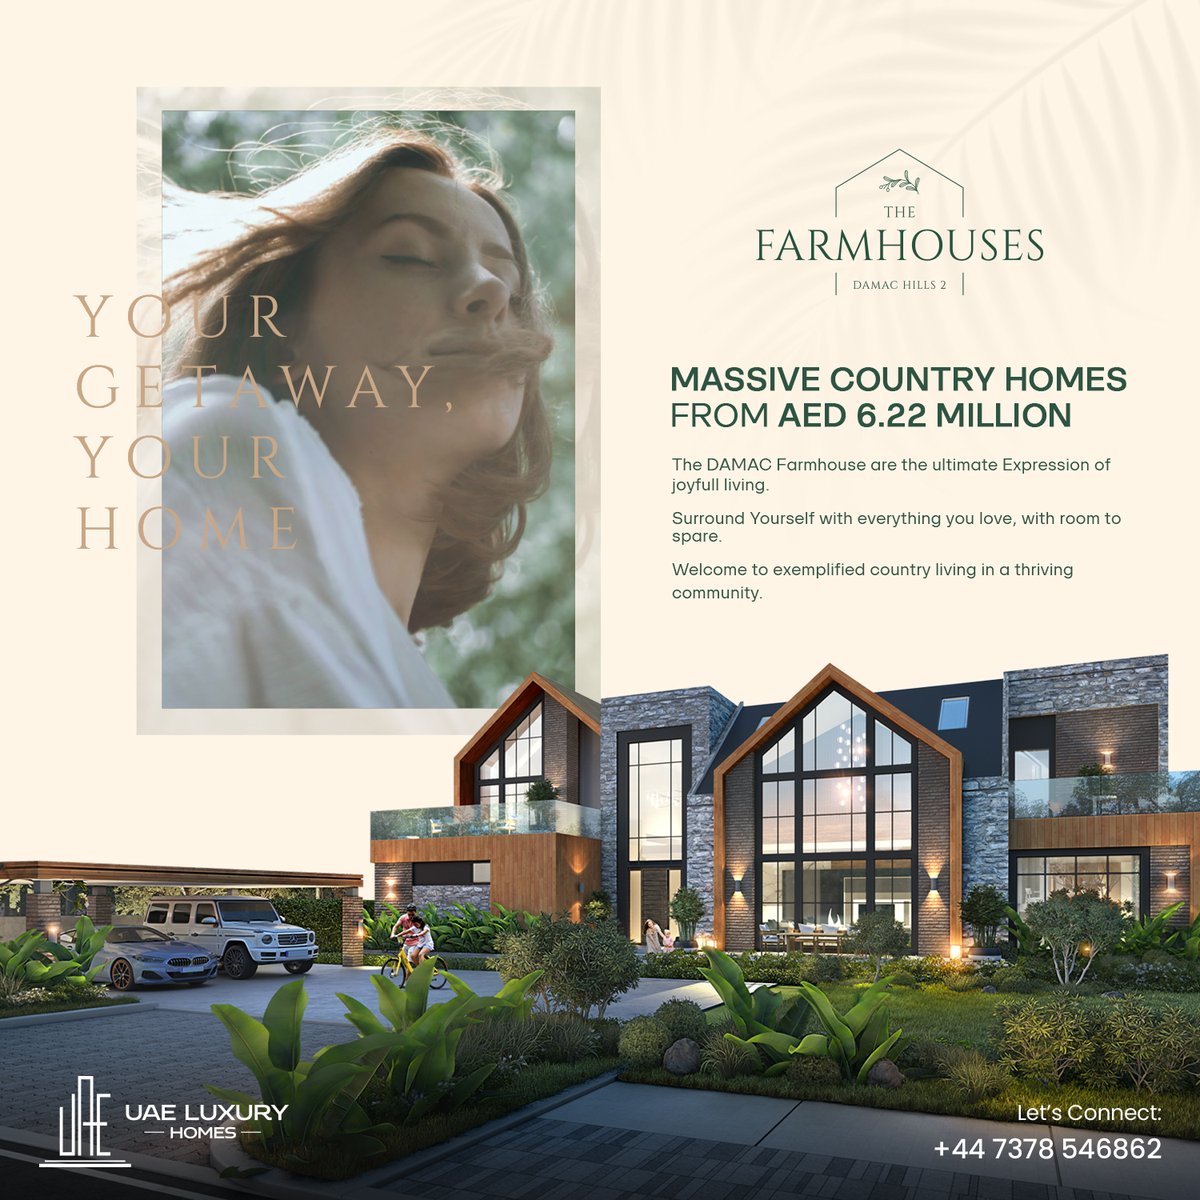 The Farmhouses at Damac Hills 2 that feature grand design 5 & 6-bedroom residences by Damac Properties within Dubai.

Starting from 6.22M AED

Contact
📞+447378546862
#Dubai #Damac #DamacFarmhouses #CountryHomes #DubaiRealEstate #Damachills #damachills2 #realestate #luxurylisting